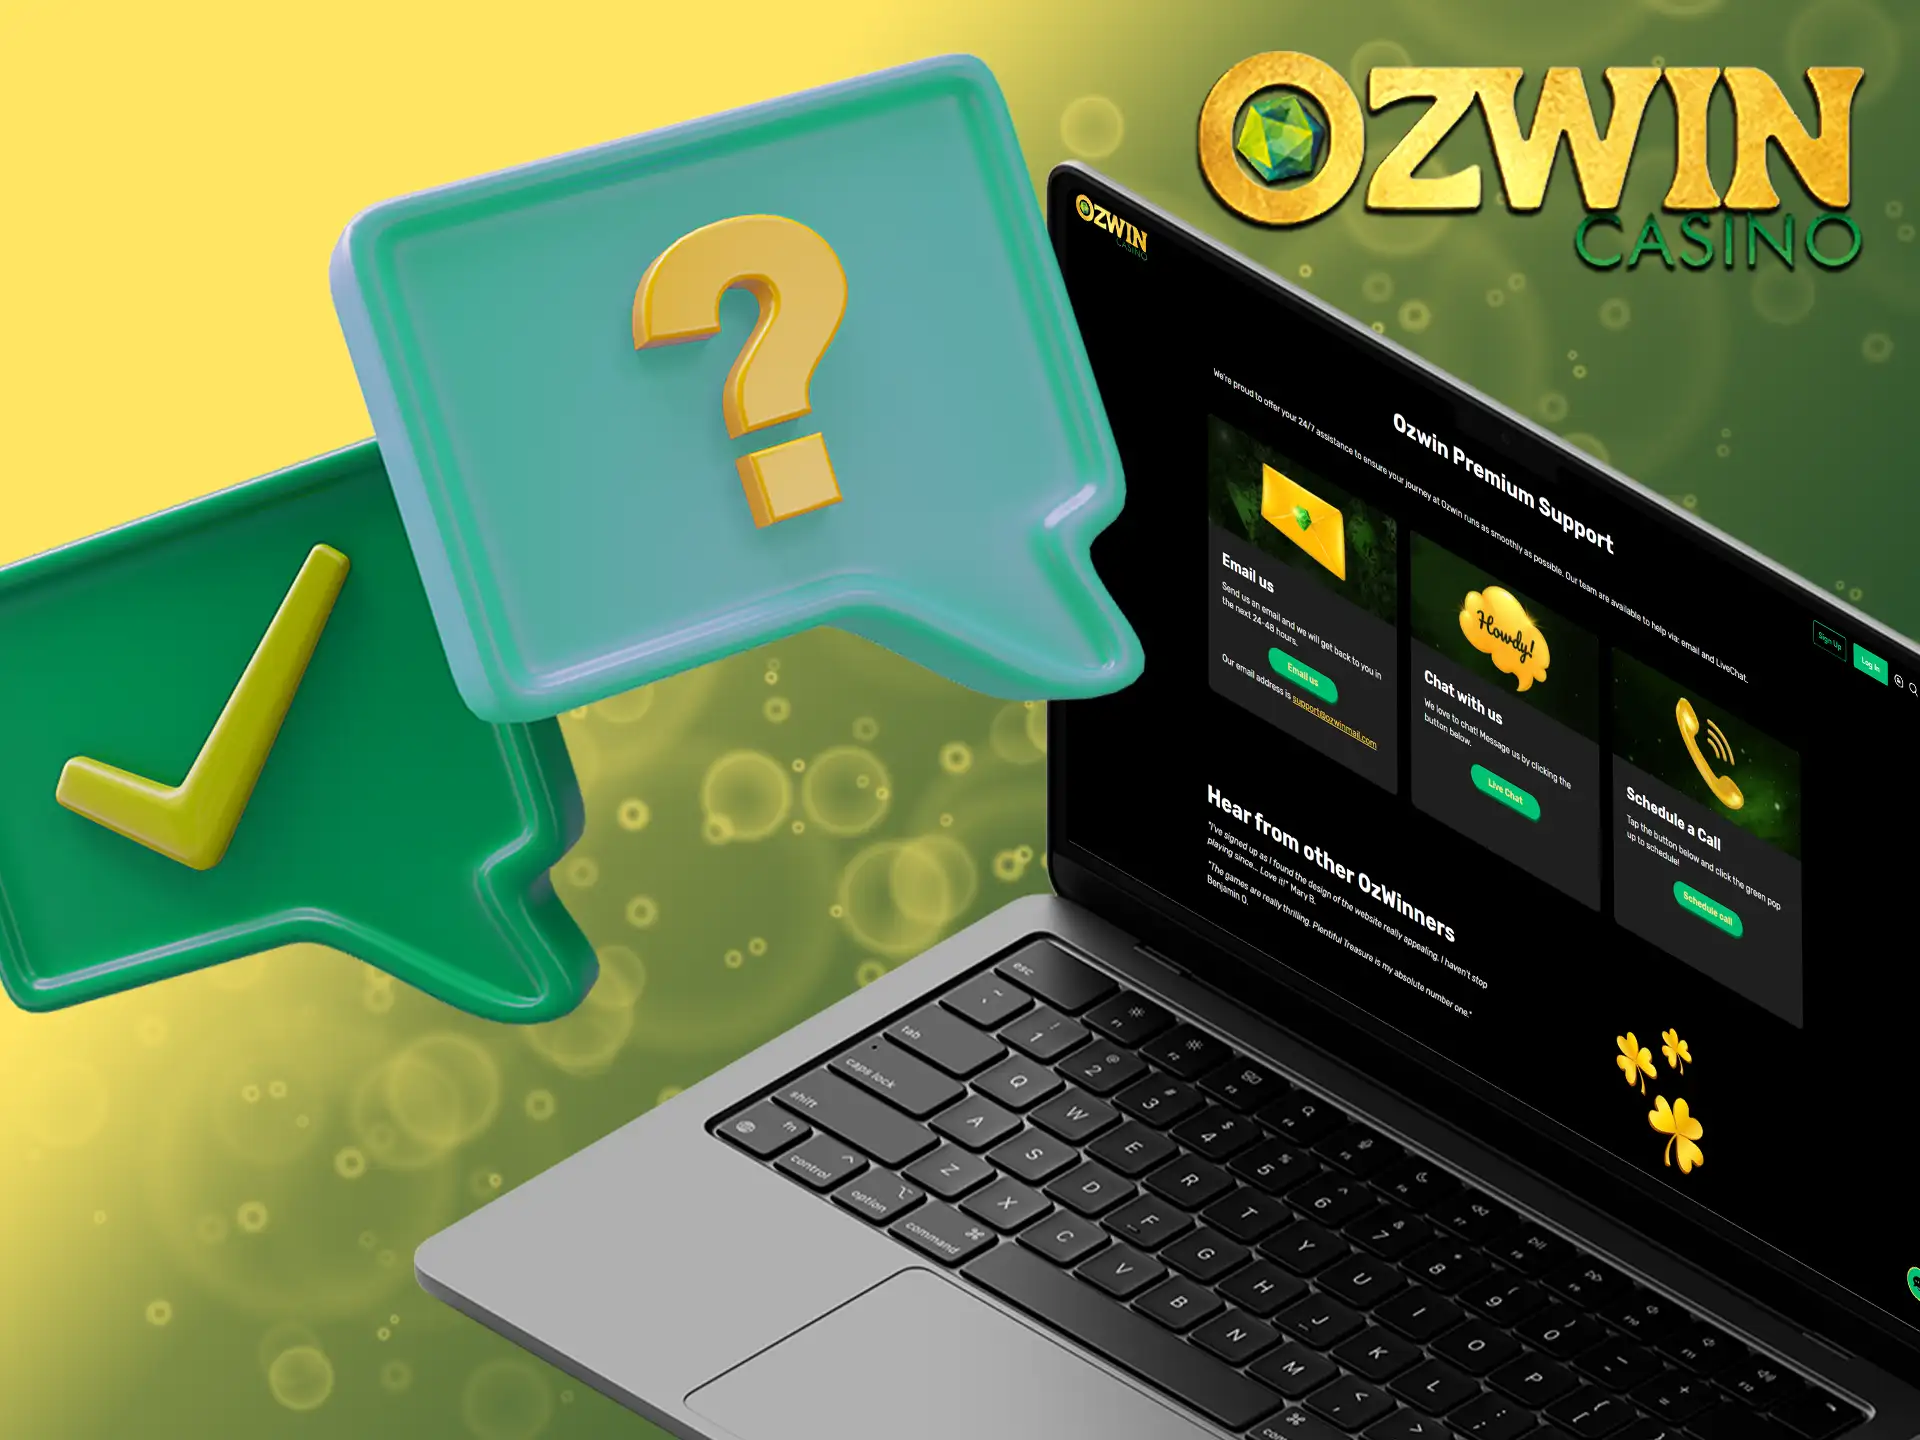 Ozwin expert customer service team is always ready to assist you quickly.